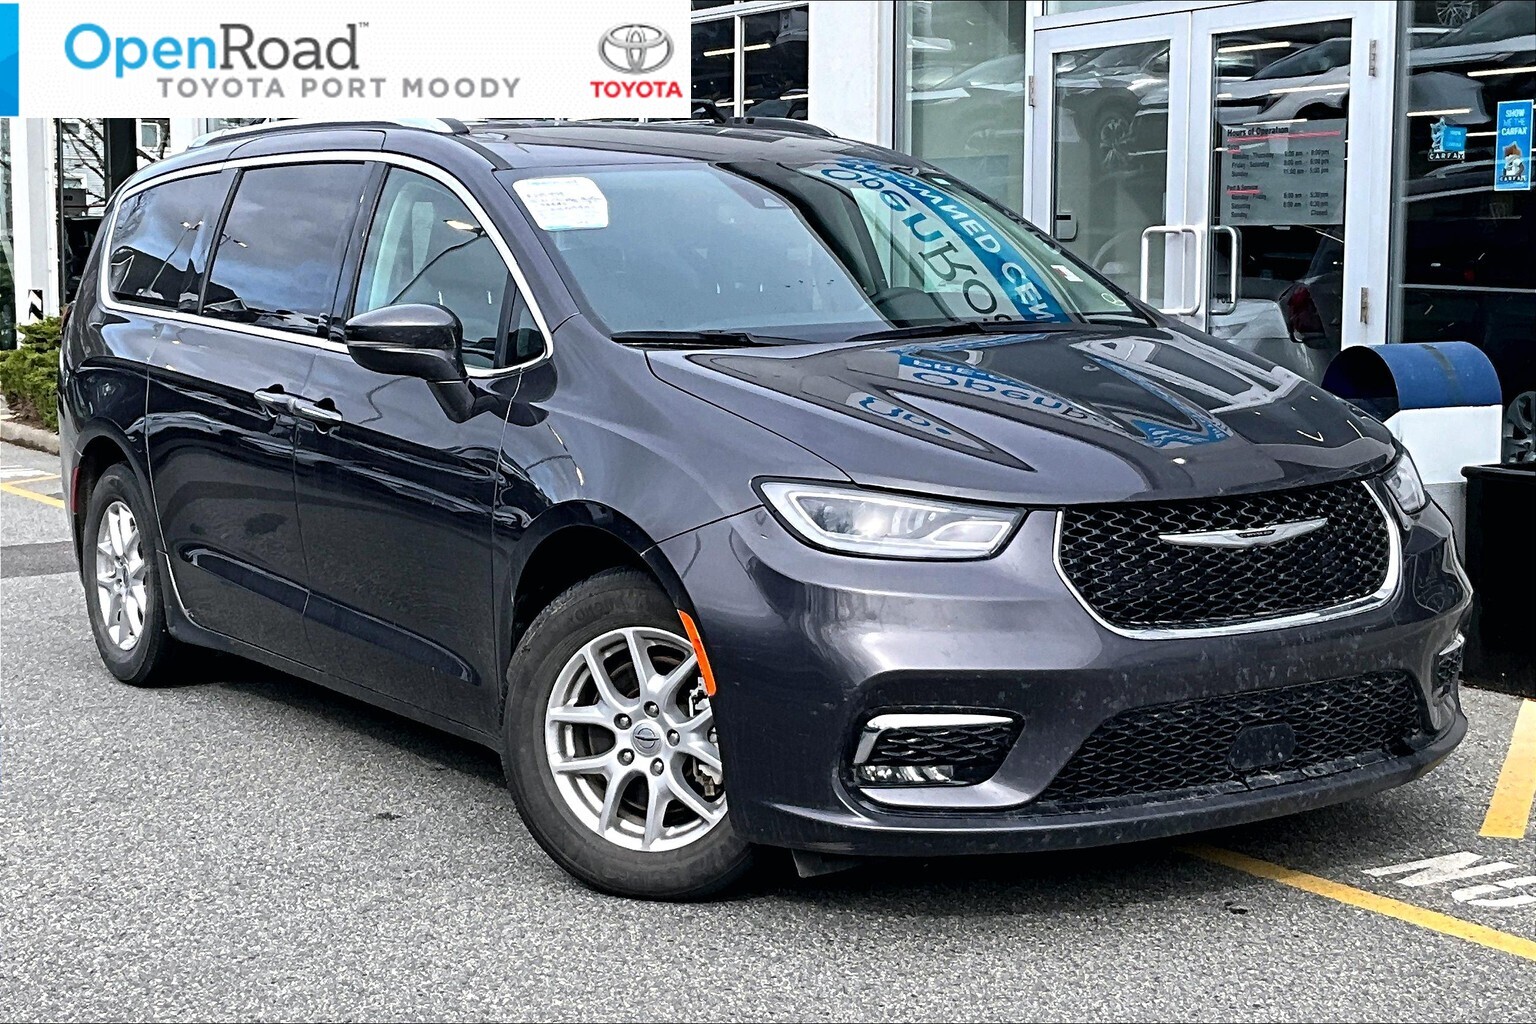 2021 Chrysler Pacifica Touring L |OpenRoad True Price |One Owner |No Clai